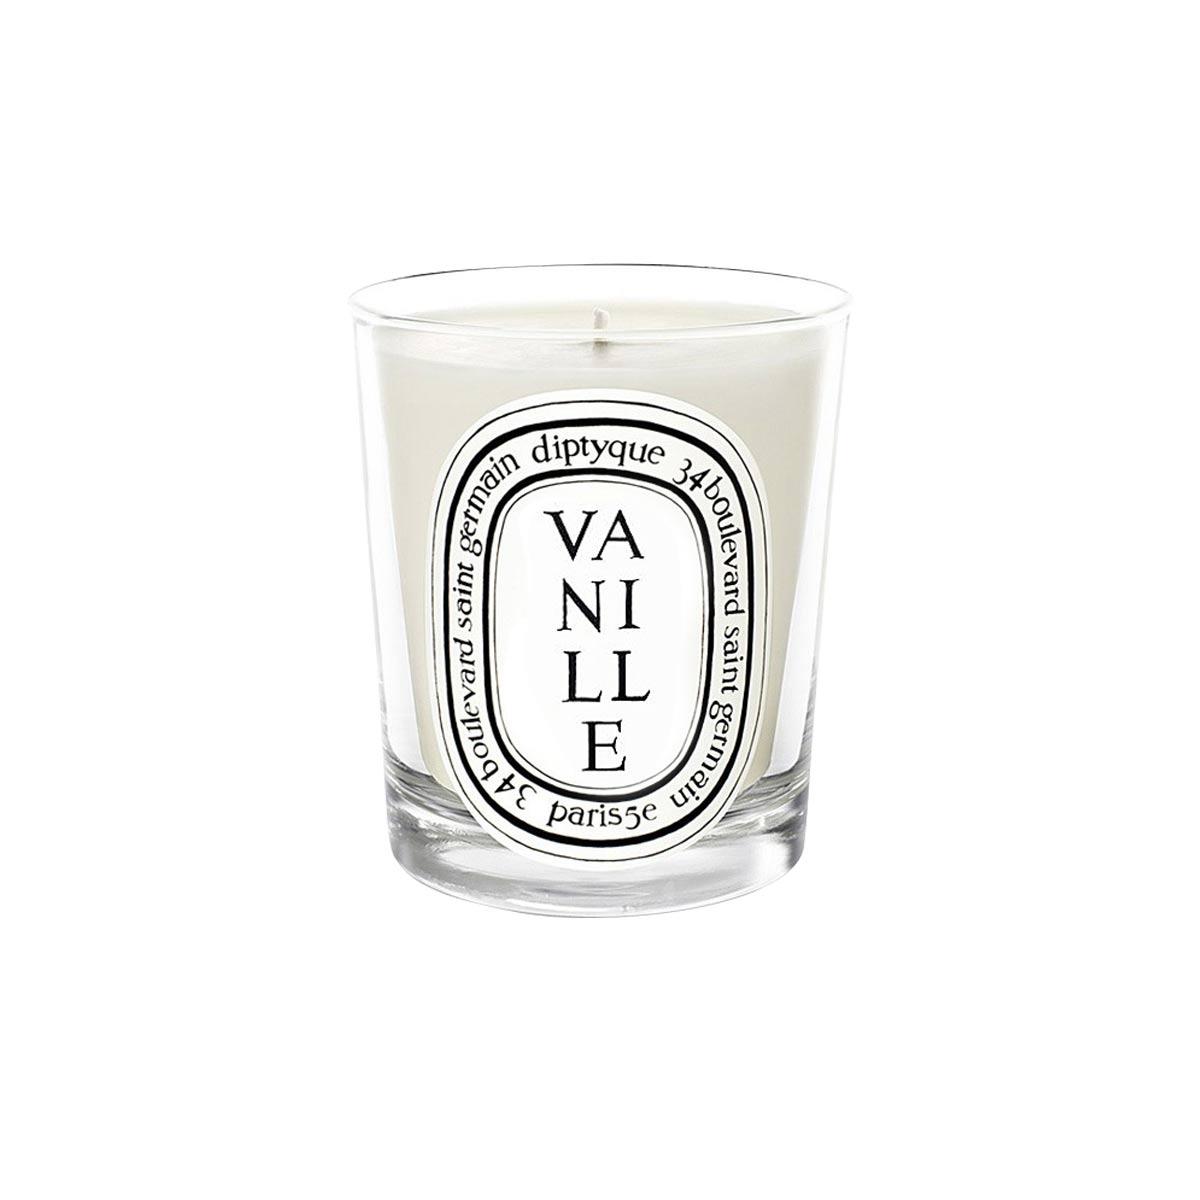 Primary image of Vanille (Vanilla) Candle